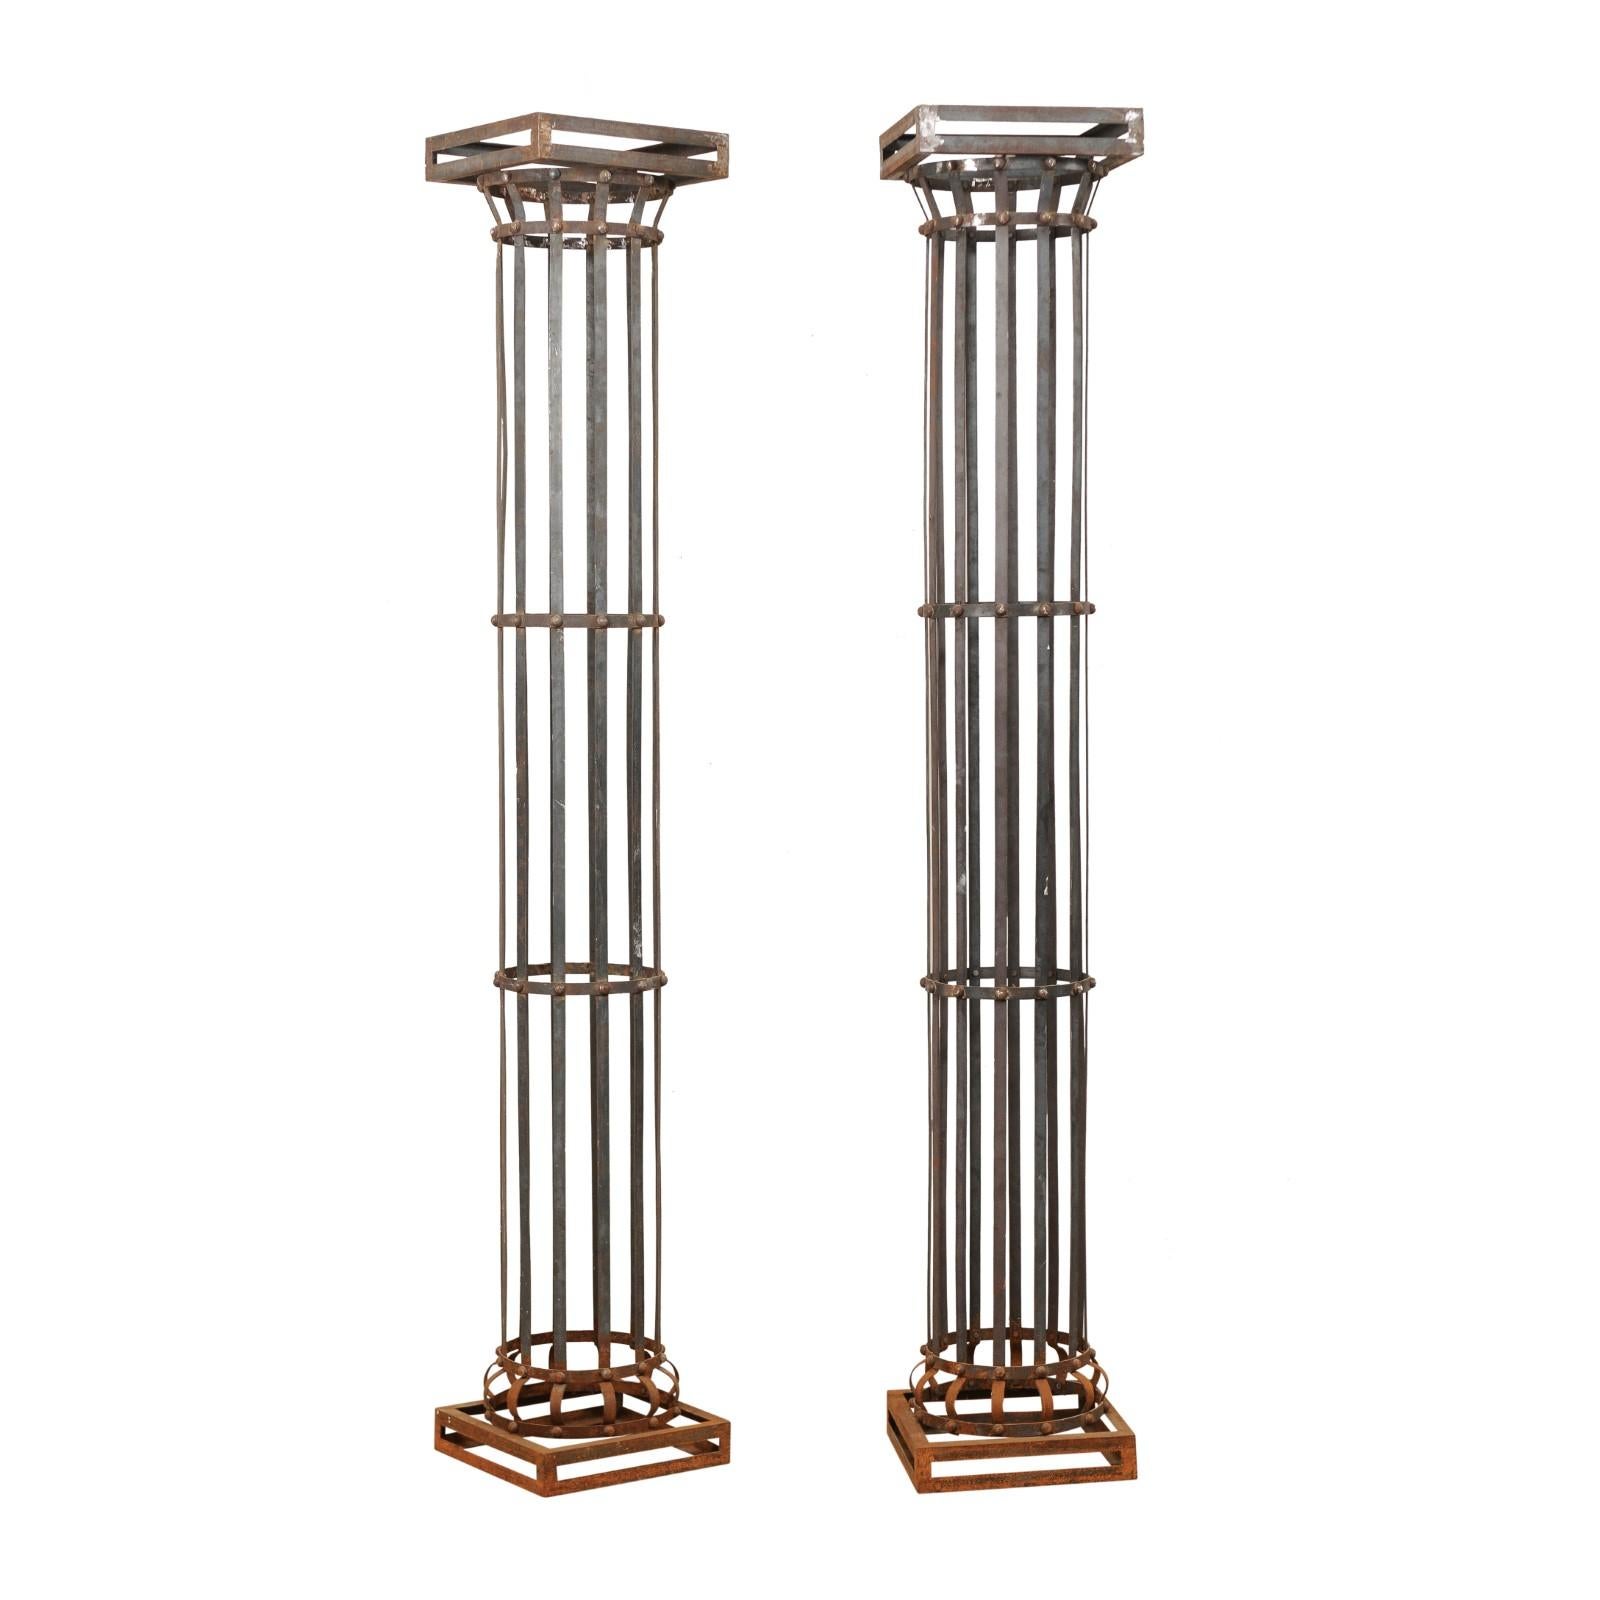 Pair of Tall Contemporary American Iron Architectural Columns